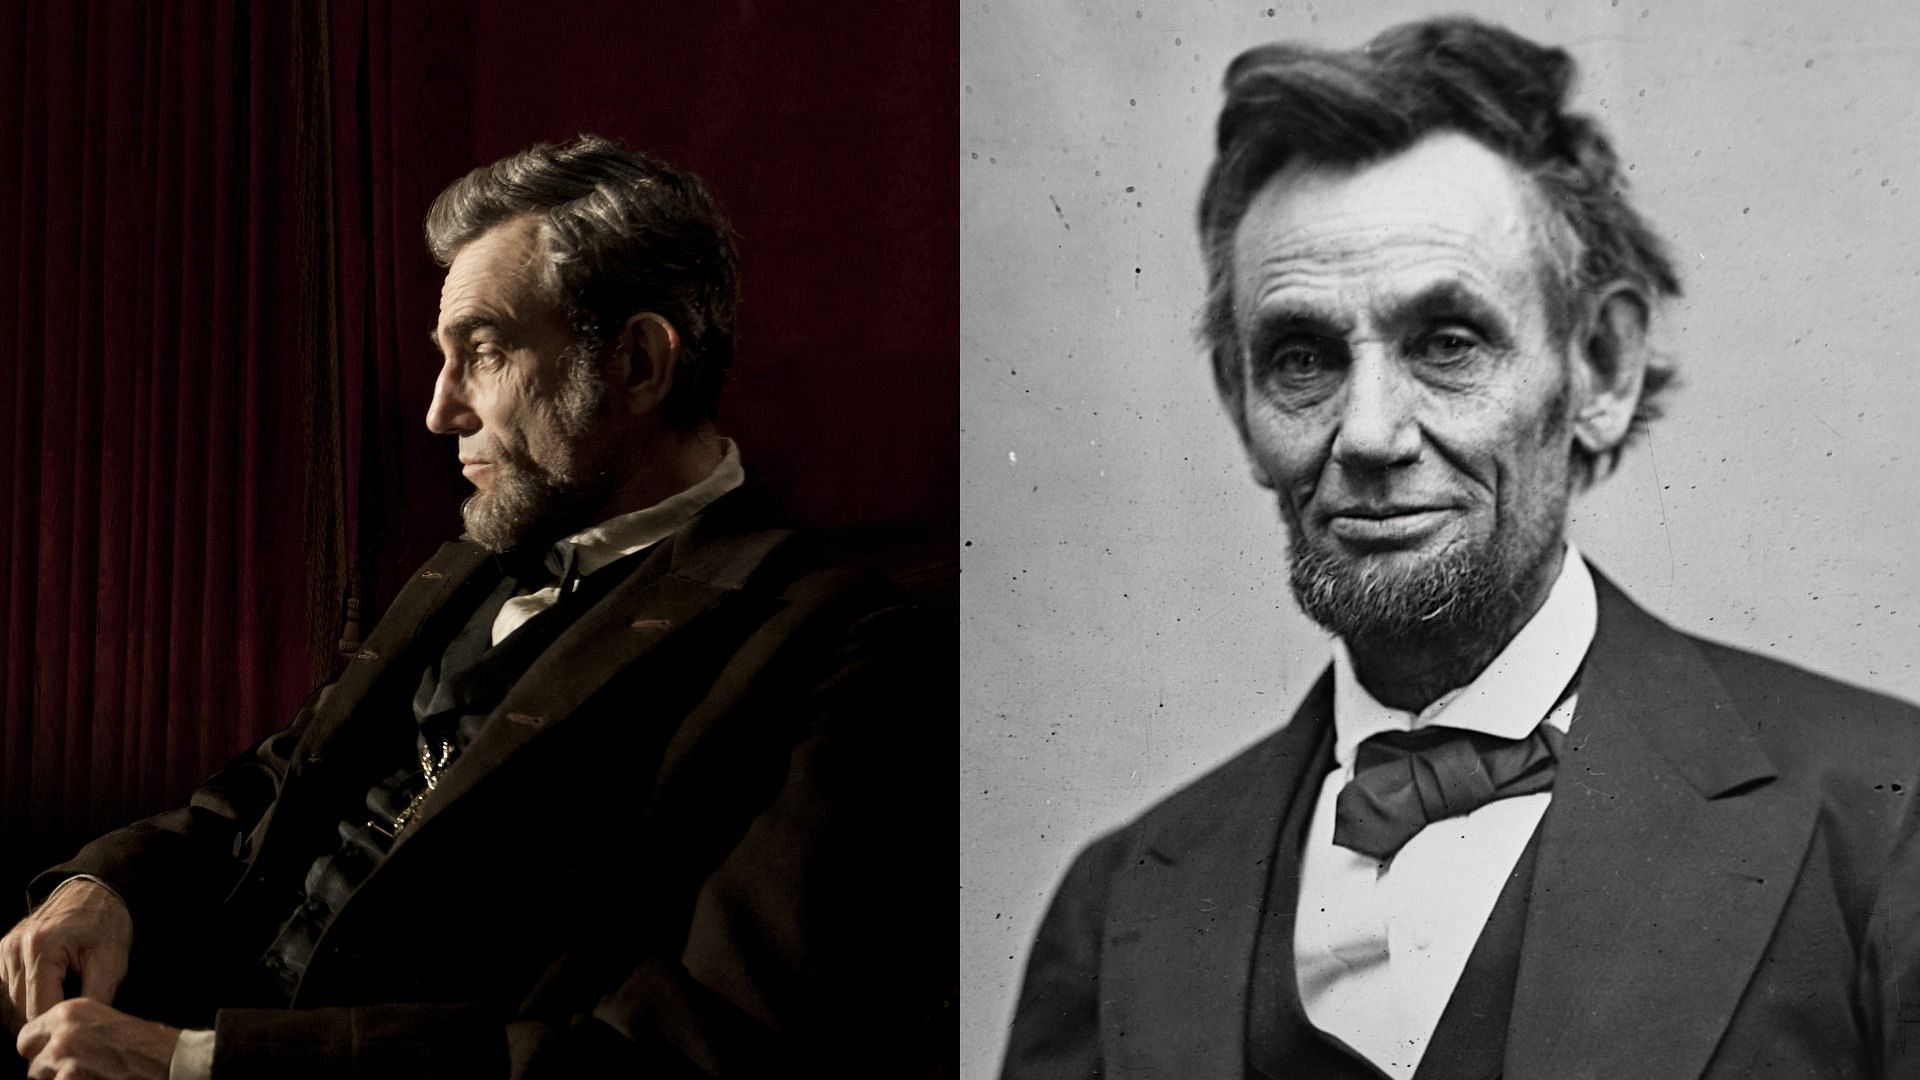 Daniel Day‑Lewis as Abraham Lincoln was a match made in heaven (Image via Sportskeeda)